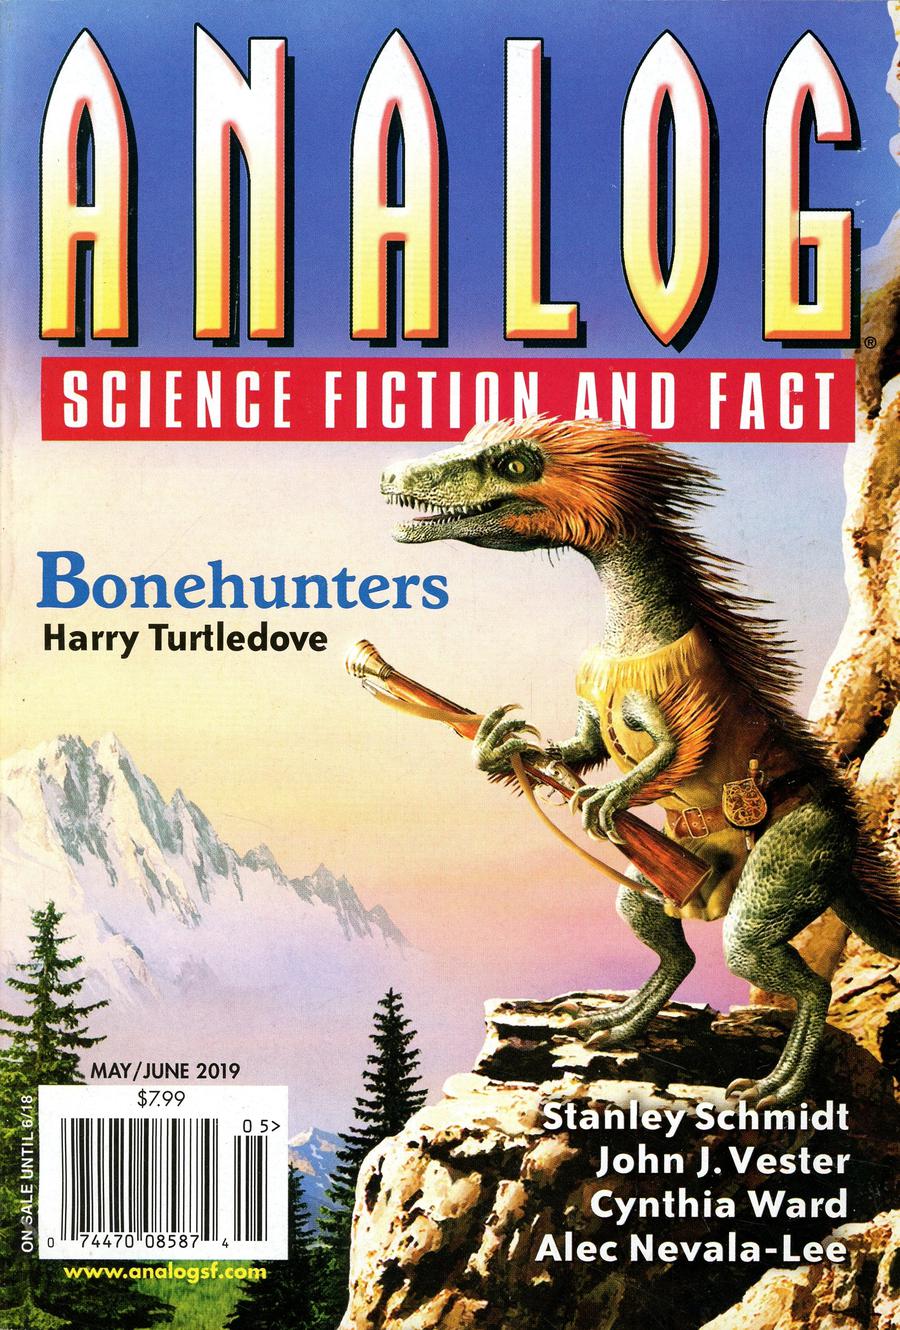 Analog Science Fiction And Fact Vol 139 #5 & 5 May / June 2019